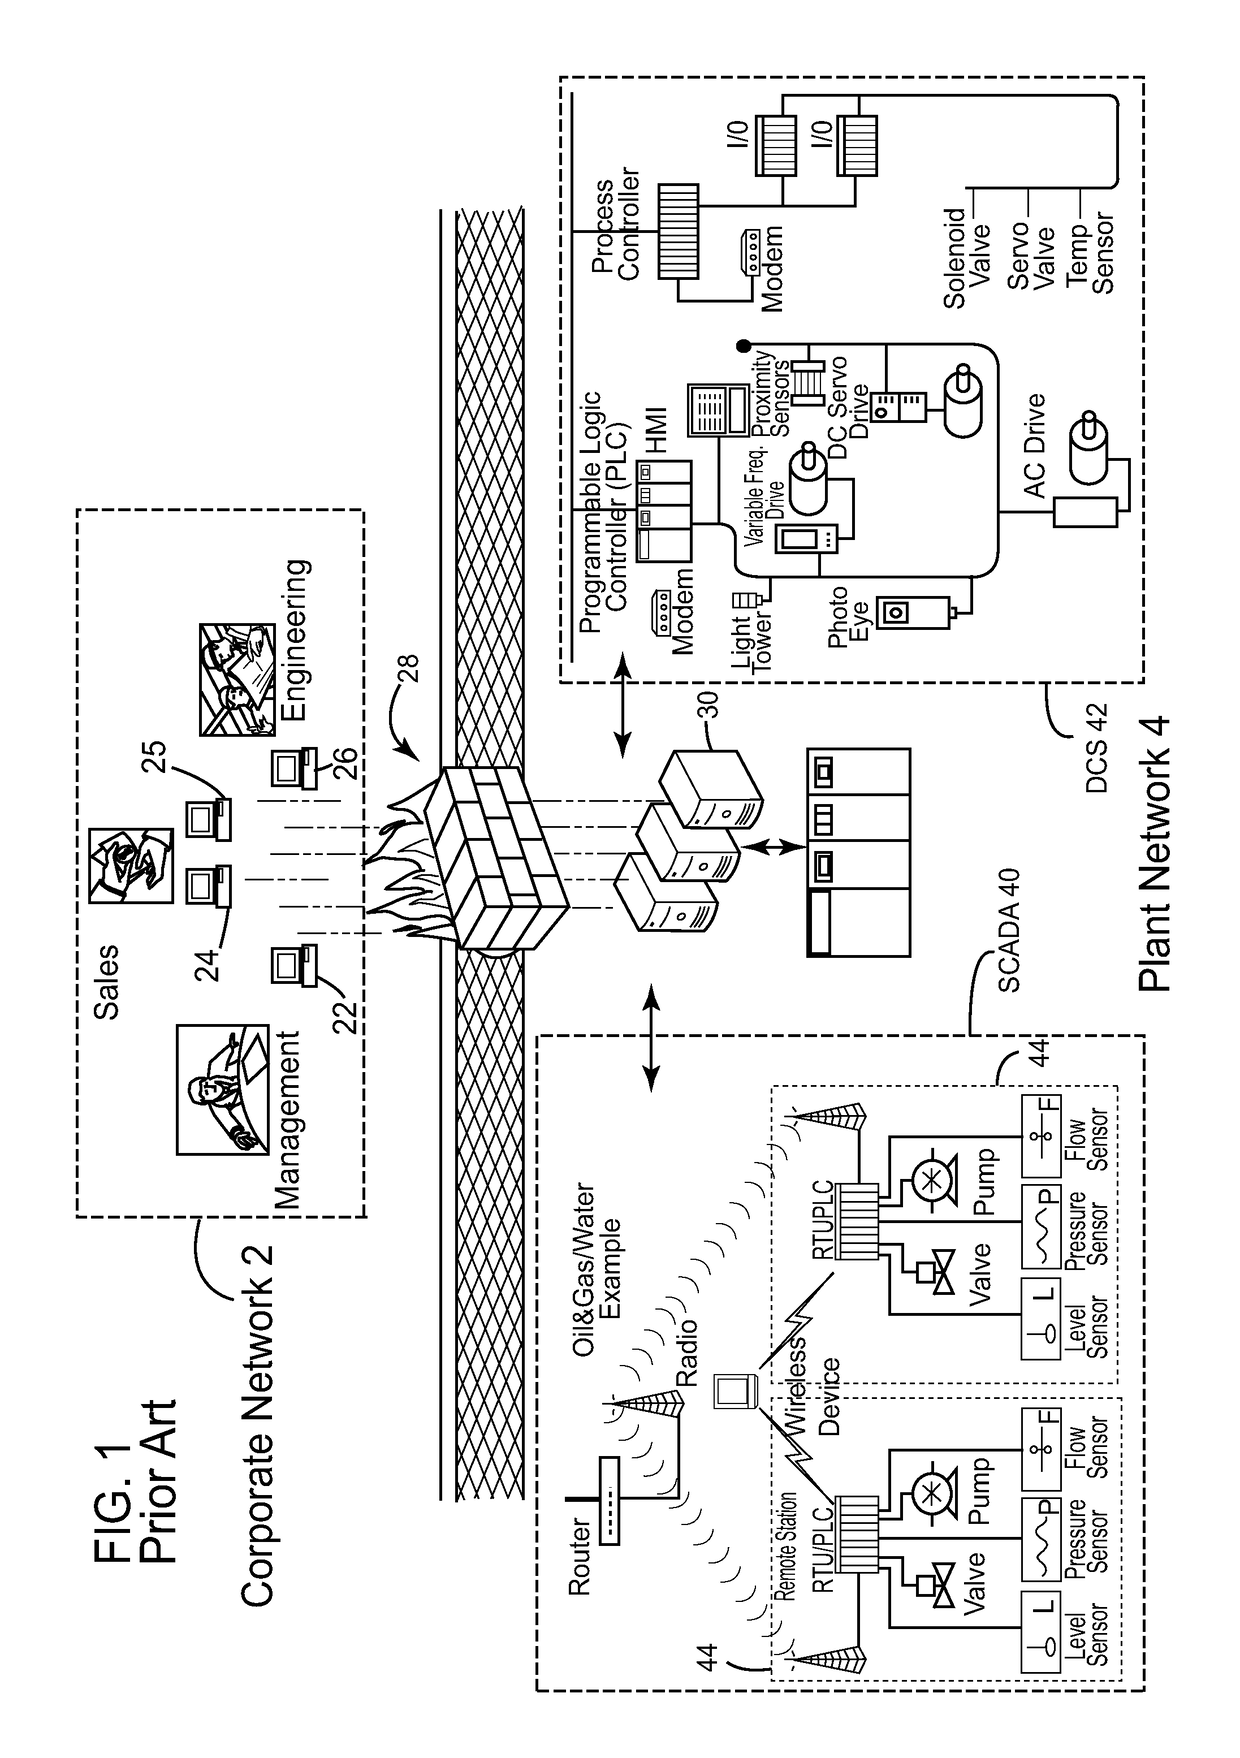 System and method for controlling access to a plant network